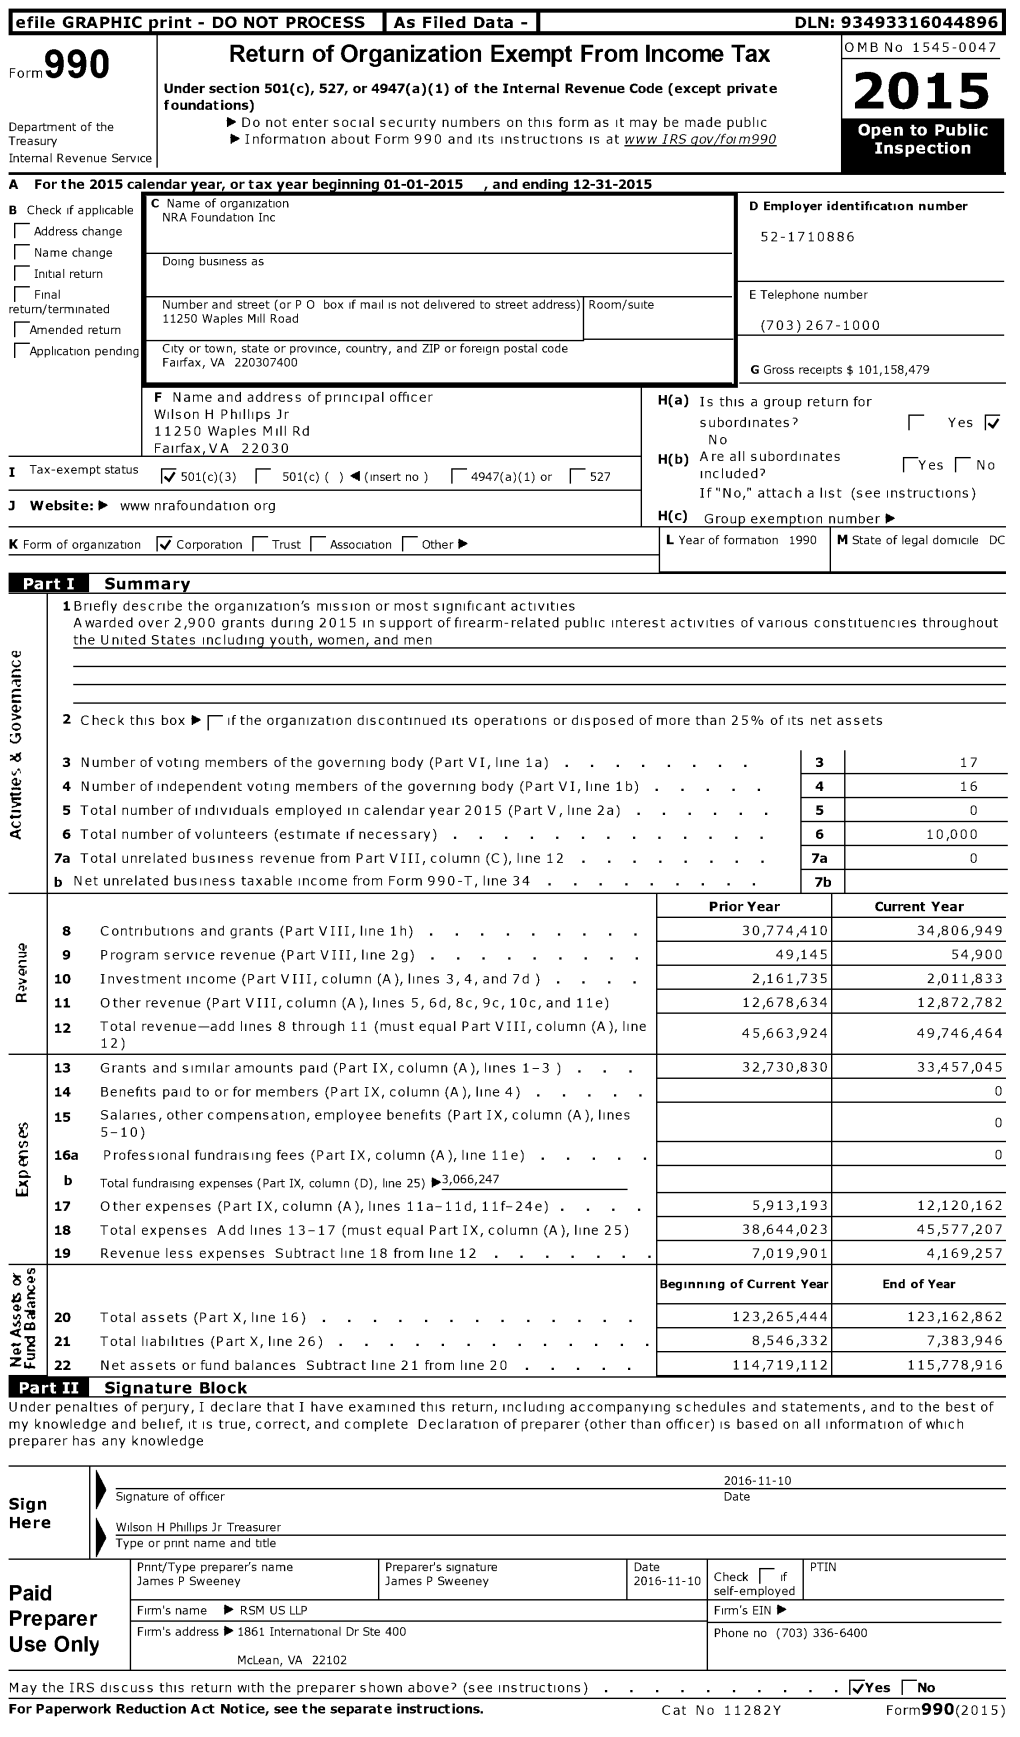 Form 990 for NRA FOUNDATION